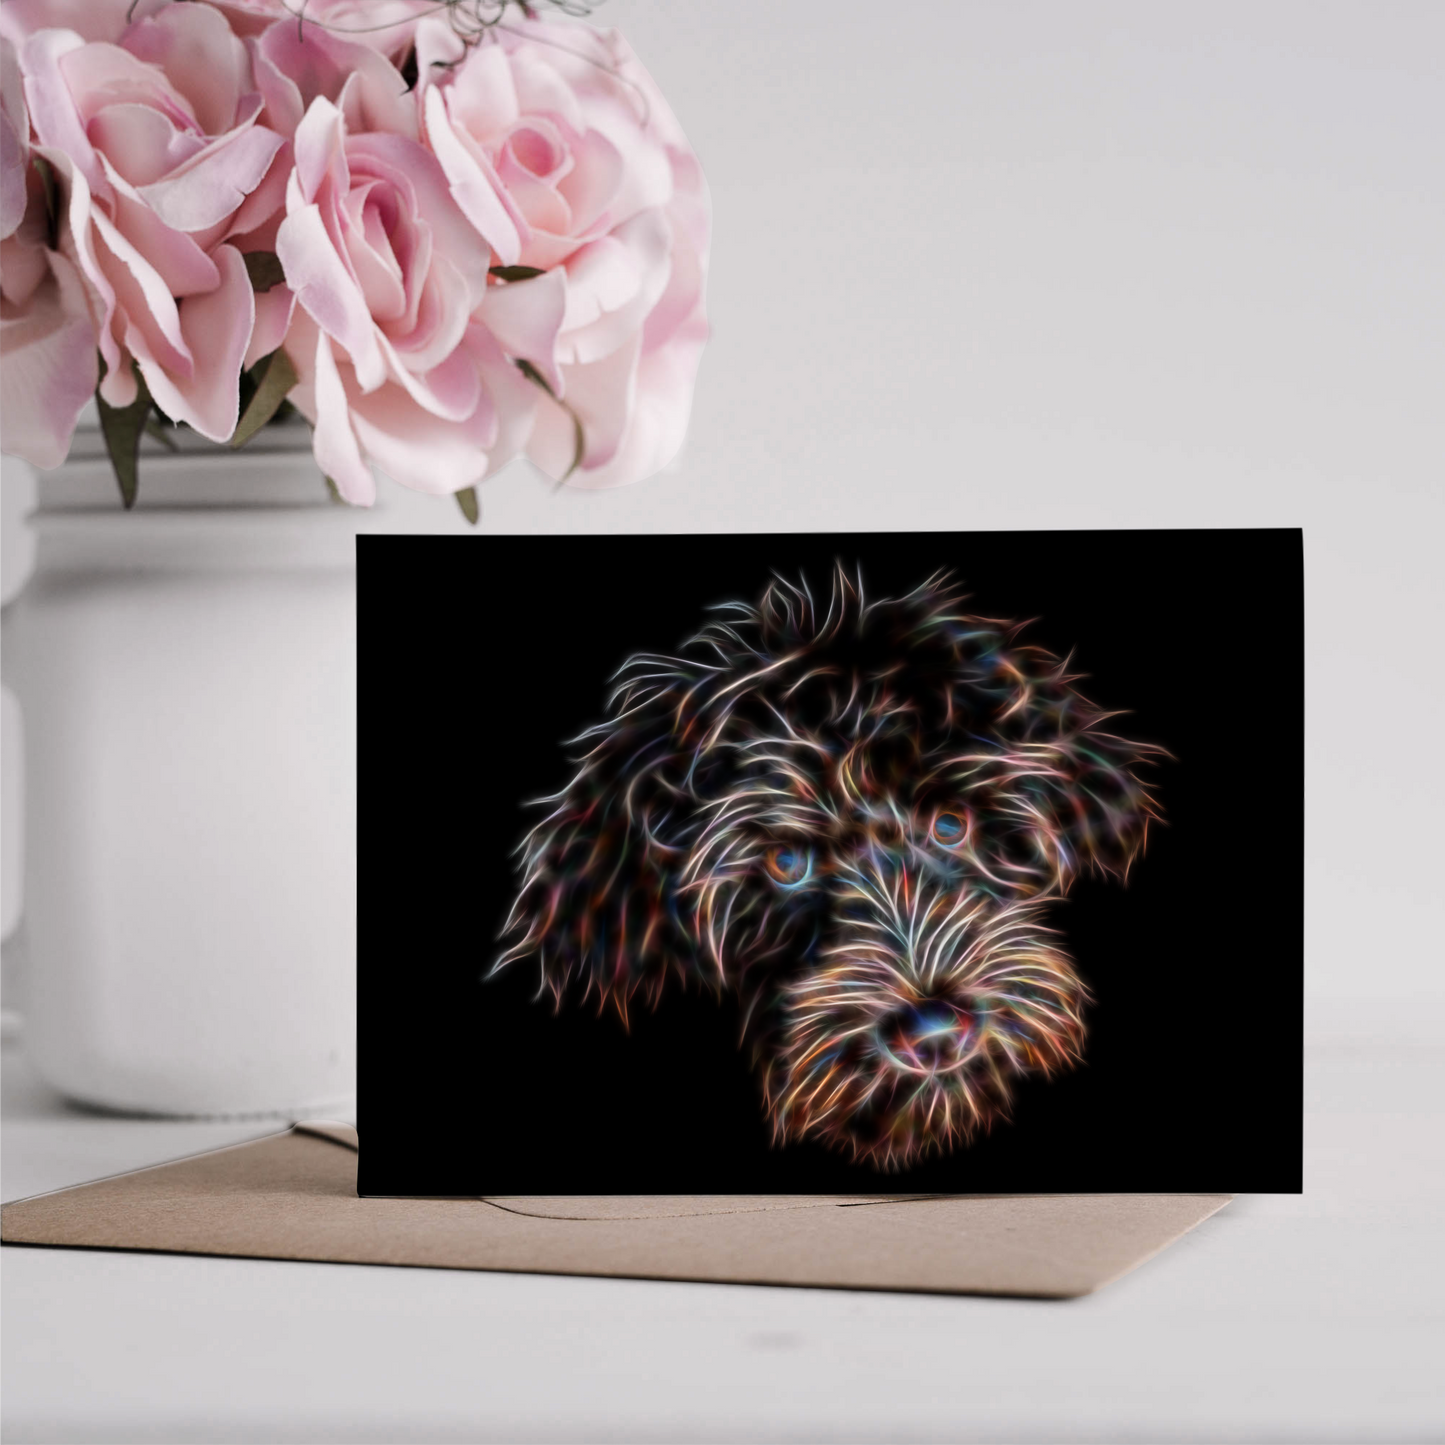 Chocolate Brown Labradoodle Greeting Card Blank Inside for Birthdays or any other Occasion